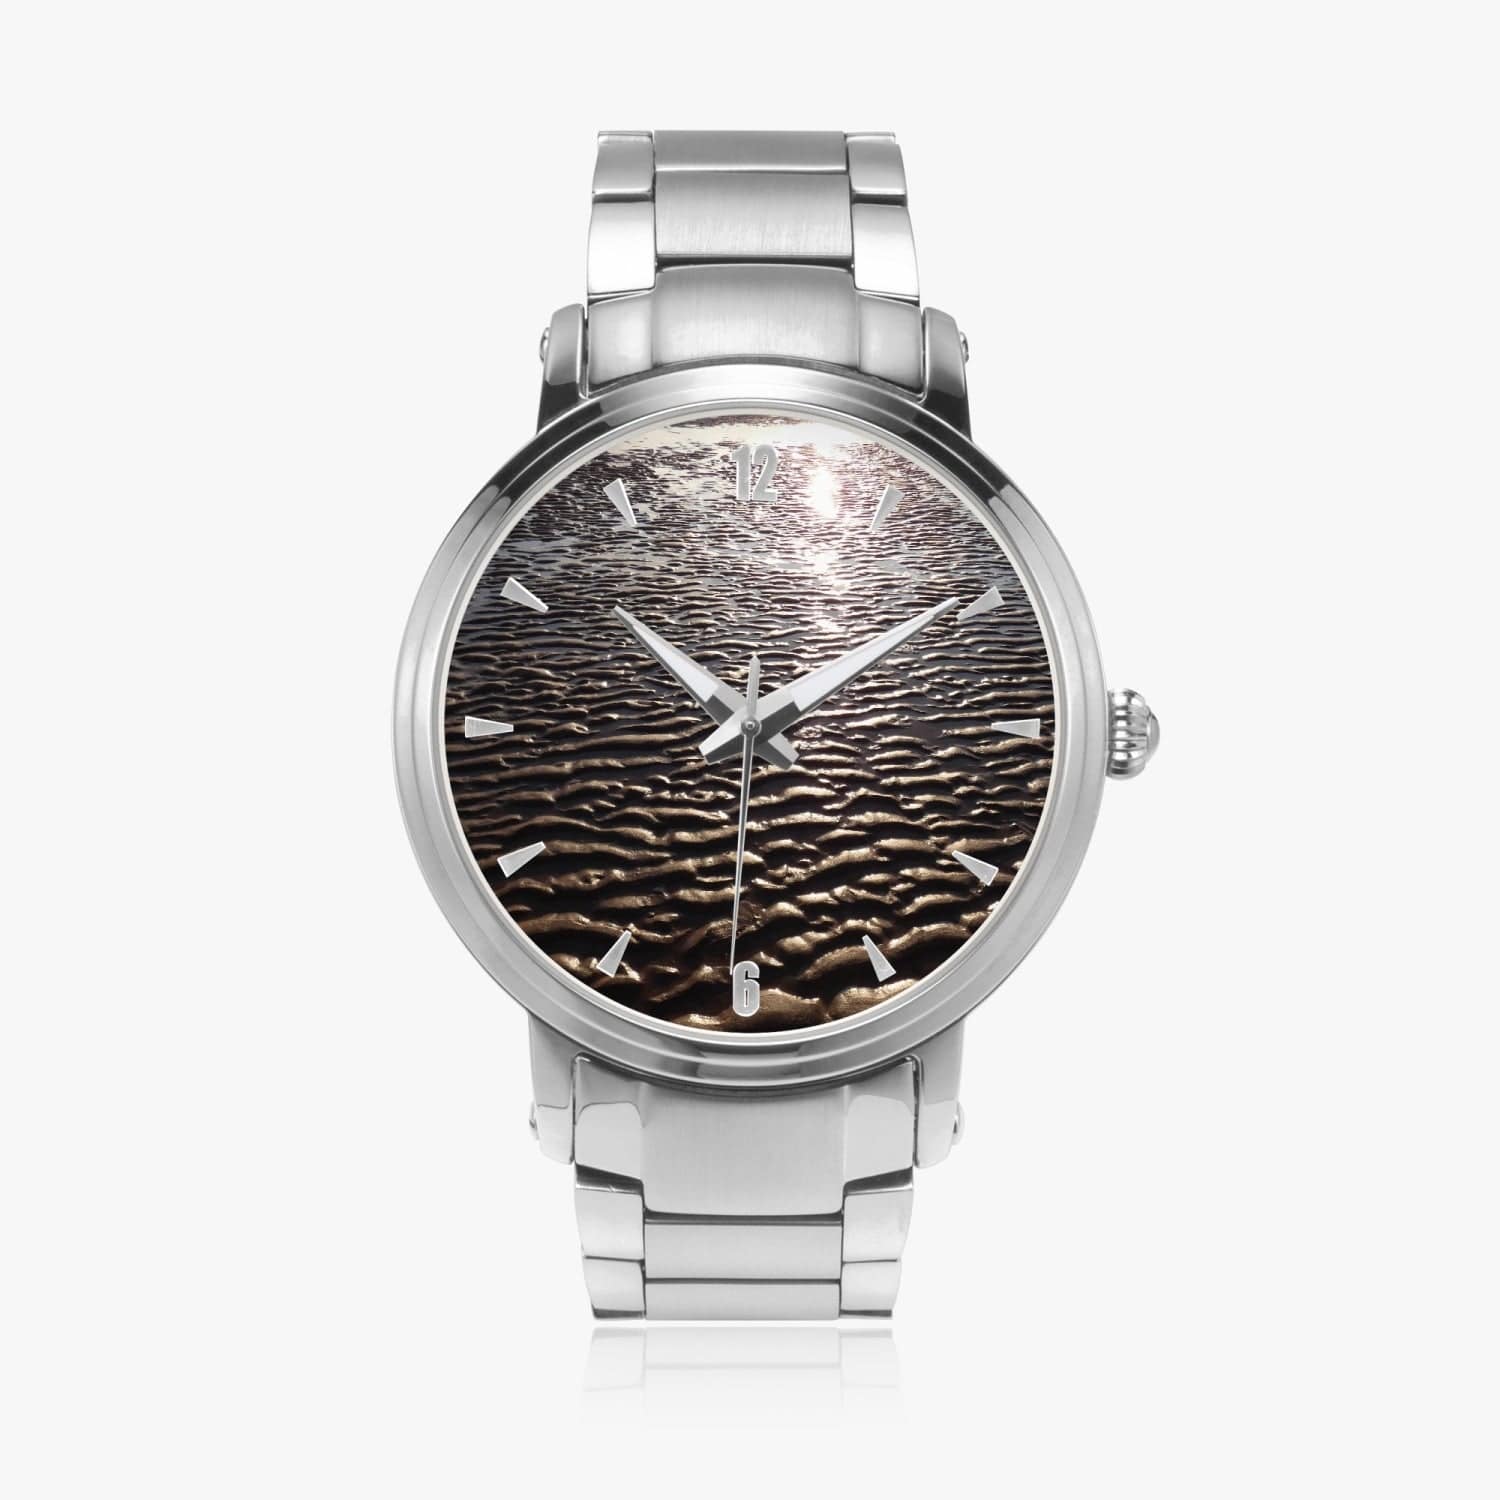 Sand relief. New Steel Strap Automatic Watch, by Sensus Studio Design